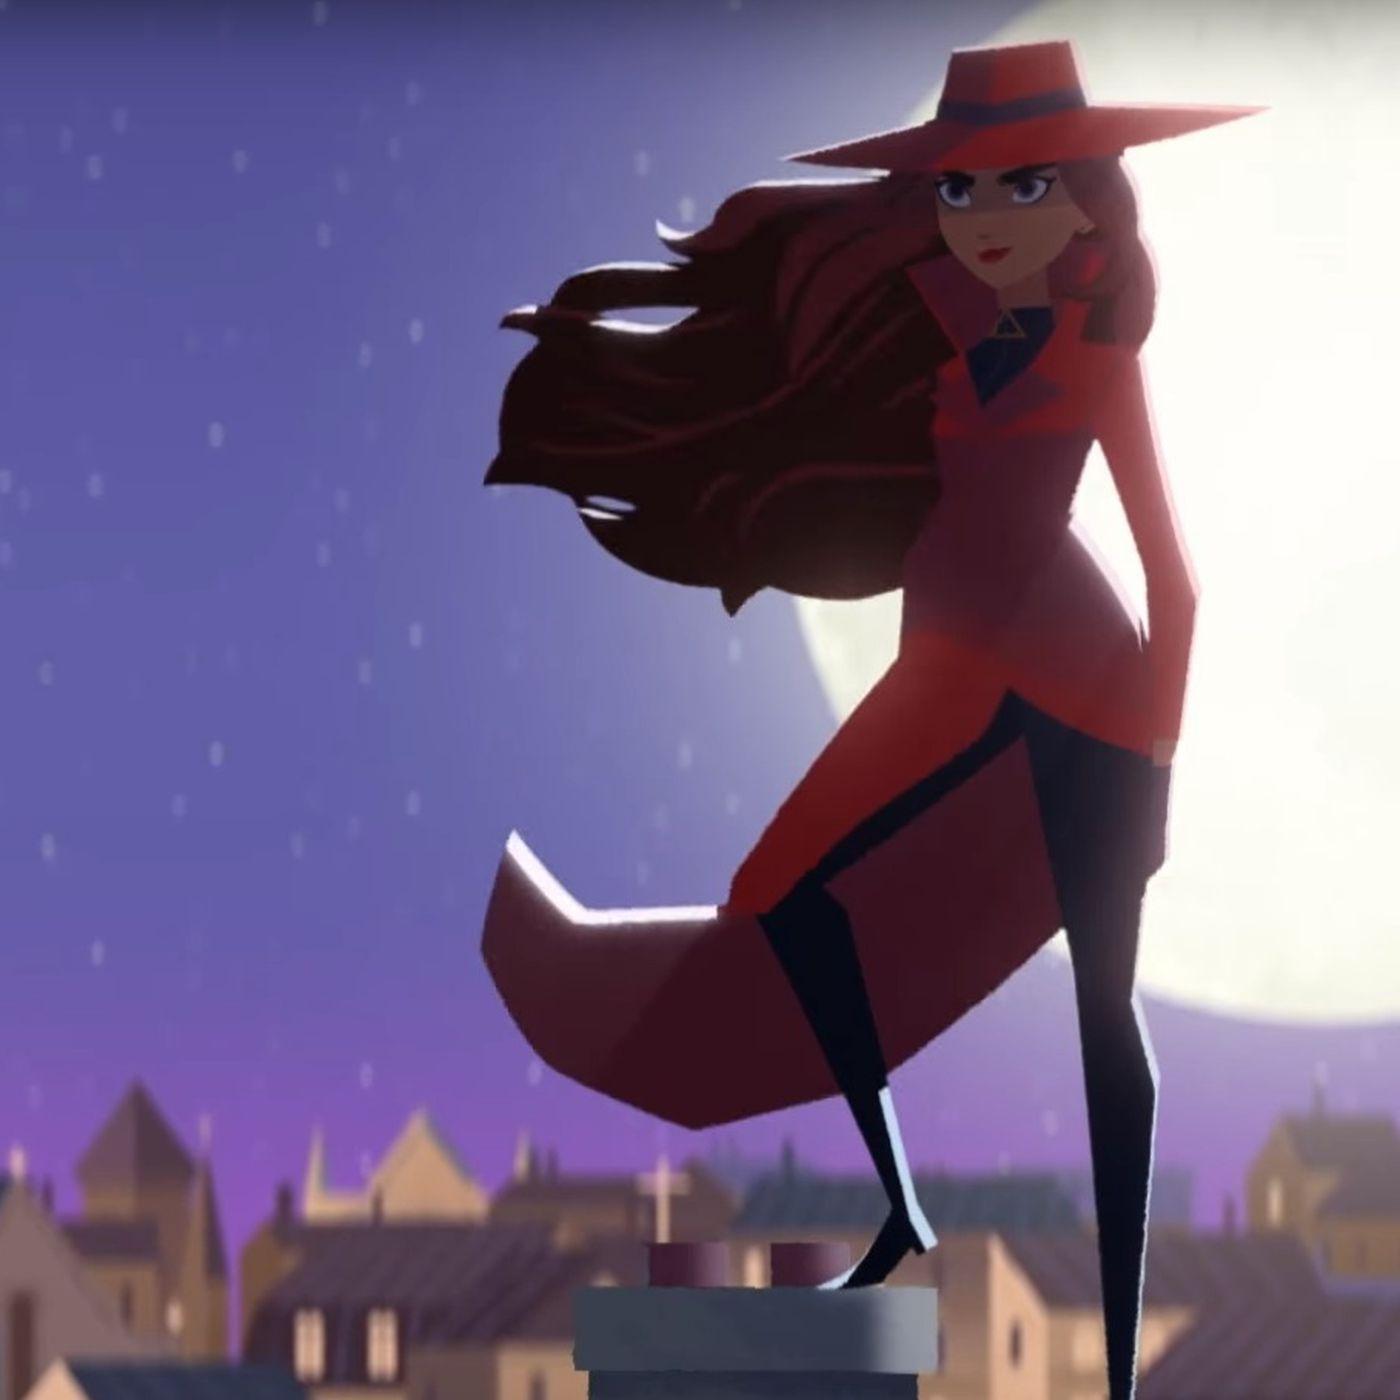 Carmen Sandiego is going to crime school in her new Netflix animated